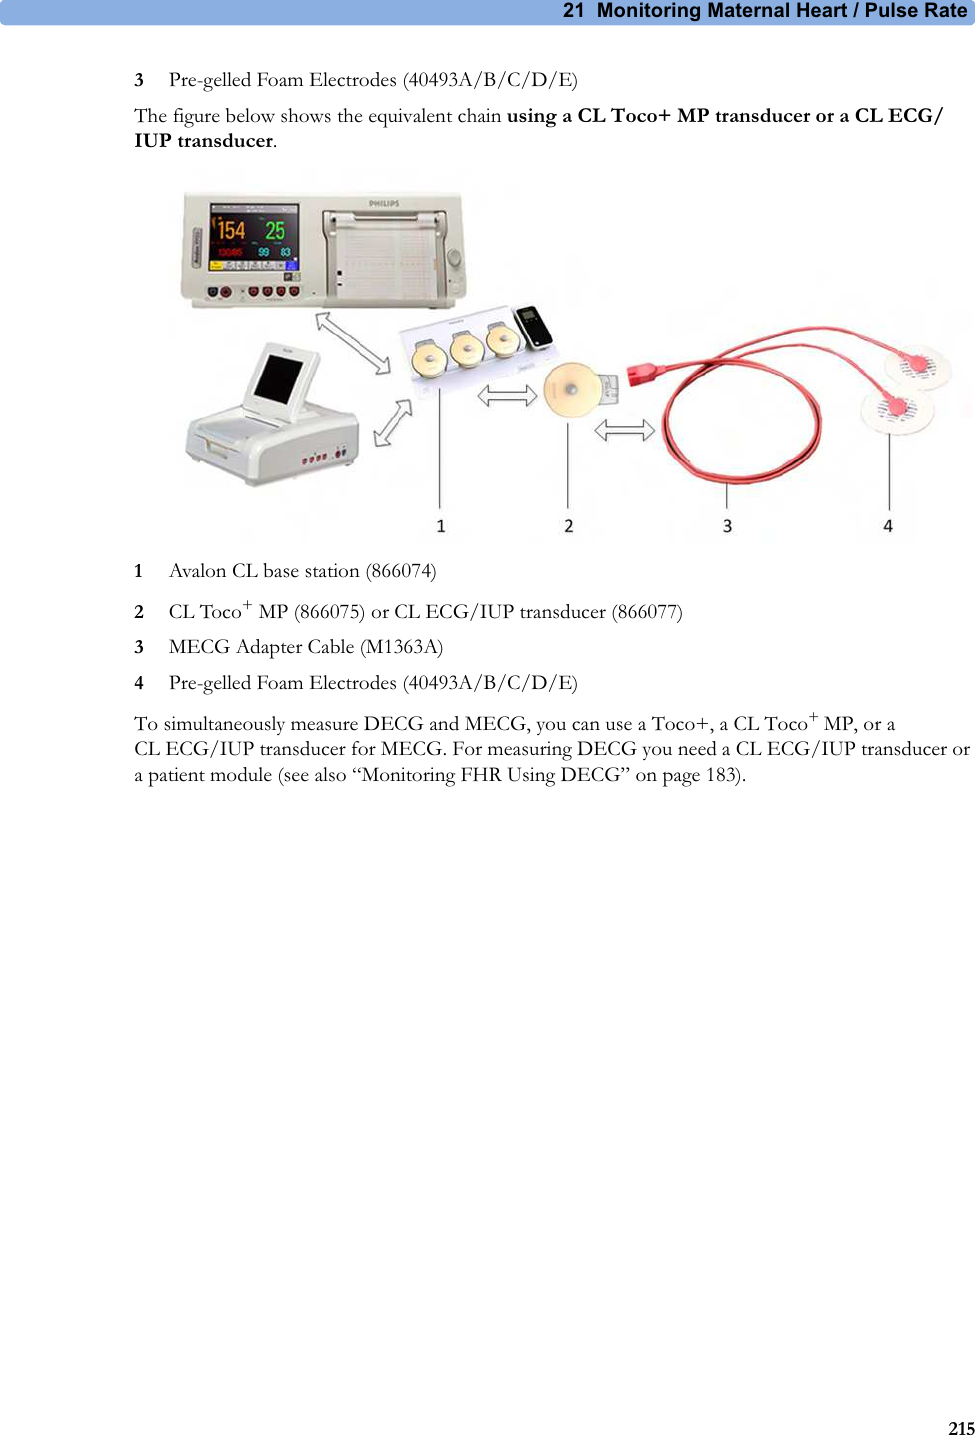 21  Monitoring Maternal Heart / Pulse Rate2153Pre-gelled Foam Electrodes (40493A/B/C/D/E)The figure below shows the equivalent chain using a CL Toco+ MP transducer or a CL ECG/IUP transducer.1Avalon CL base station (866074)2CL Toco+ MP (866075) or CL ECG/IUP transducer (866077)3MECG Adapter Cable (M1363A)4Pre-gelled Foam Electrodes (40493A/B/C/D/E)To simultaneously measure DECG and MECG, you can use a Toco+, a CL Toco+ MP, or a CL ECG/IUP transducer for MECG. For measuring DECG you need a CL ECG/IUP transducer or a patient module (see also “Monitoring FHR Using DECG” on page 183).